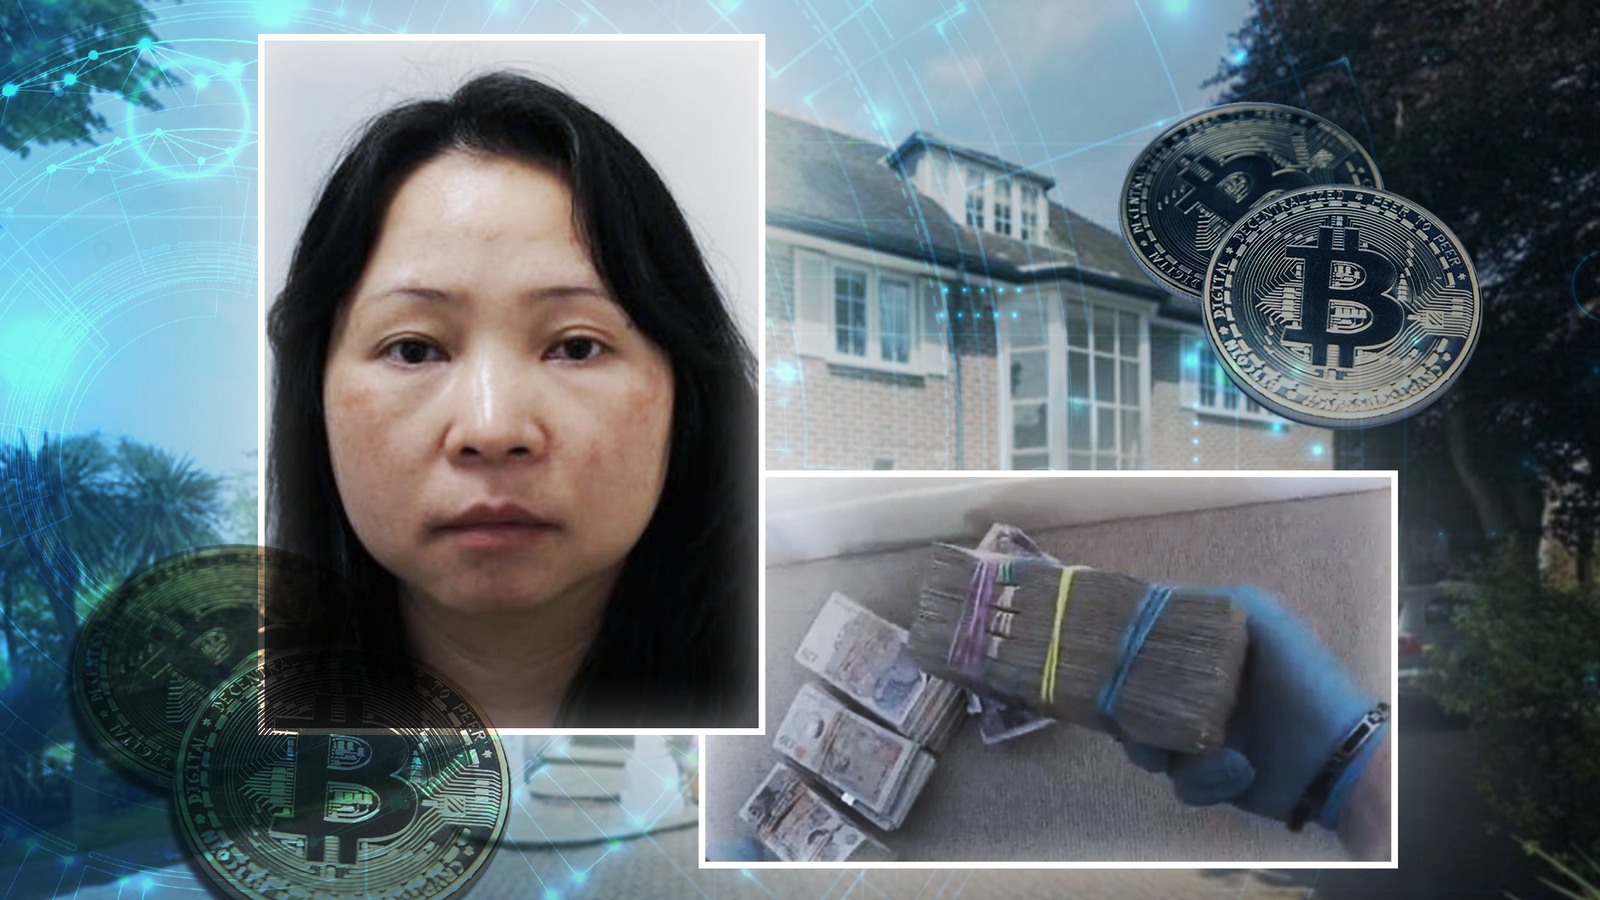 Chinese takeaway worker Jian Wen jailed for money laundering after £3bn Bitcoin seizure